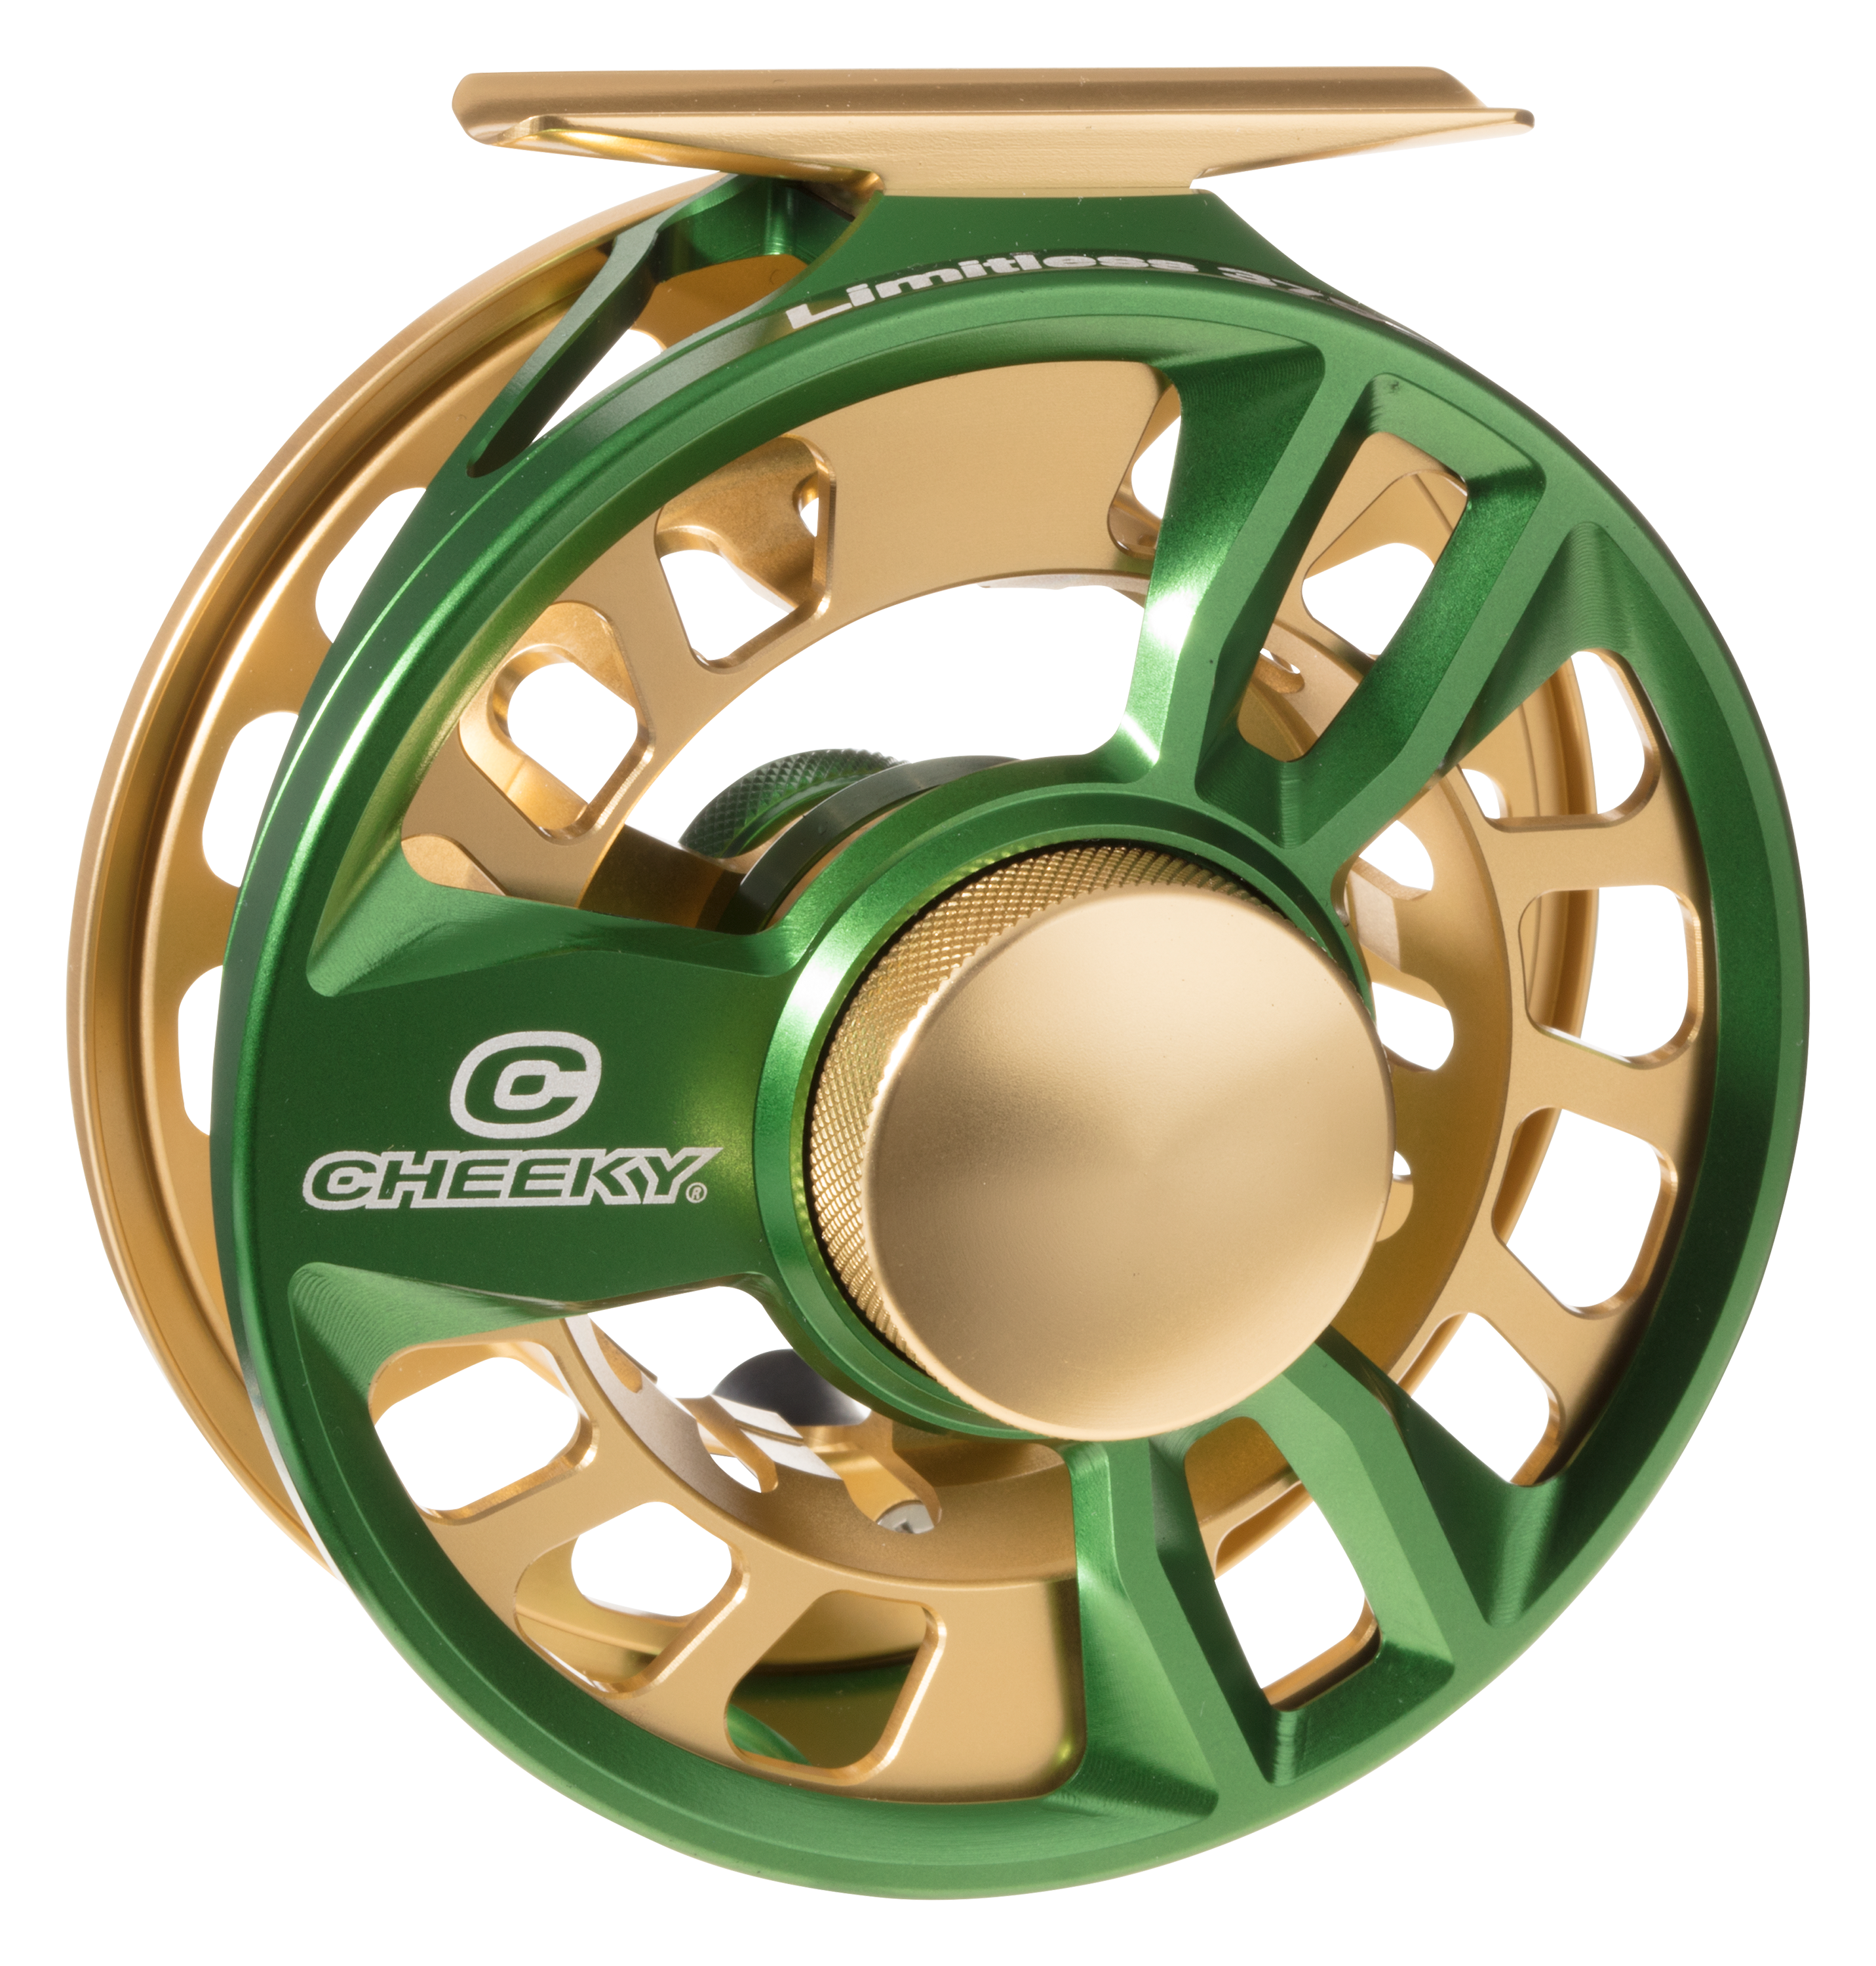 Cheeky Limitless Fly Reel - Green Gold - Model 2002